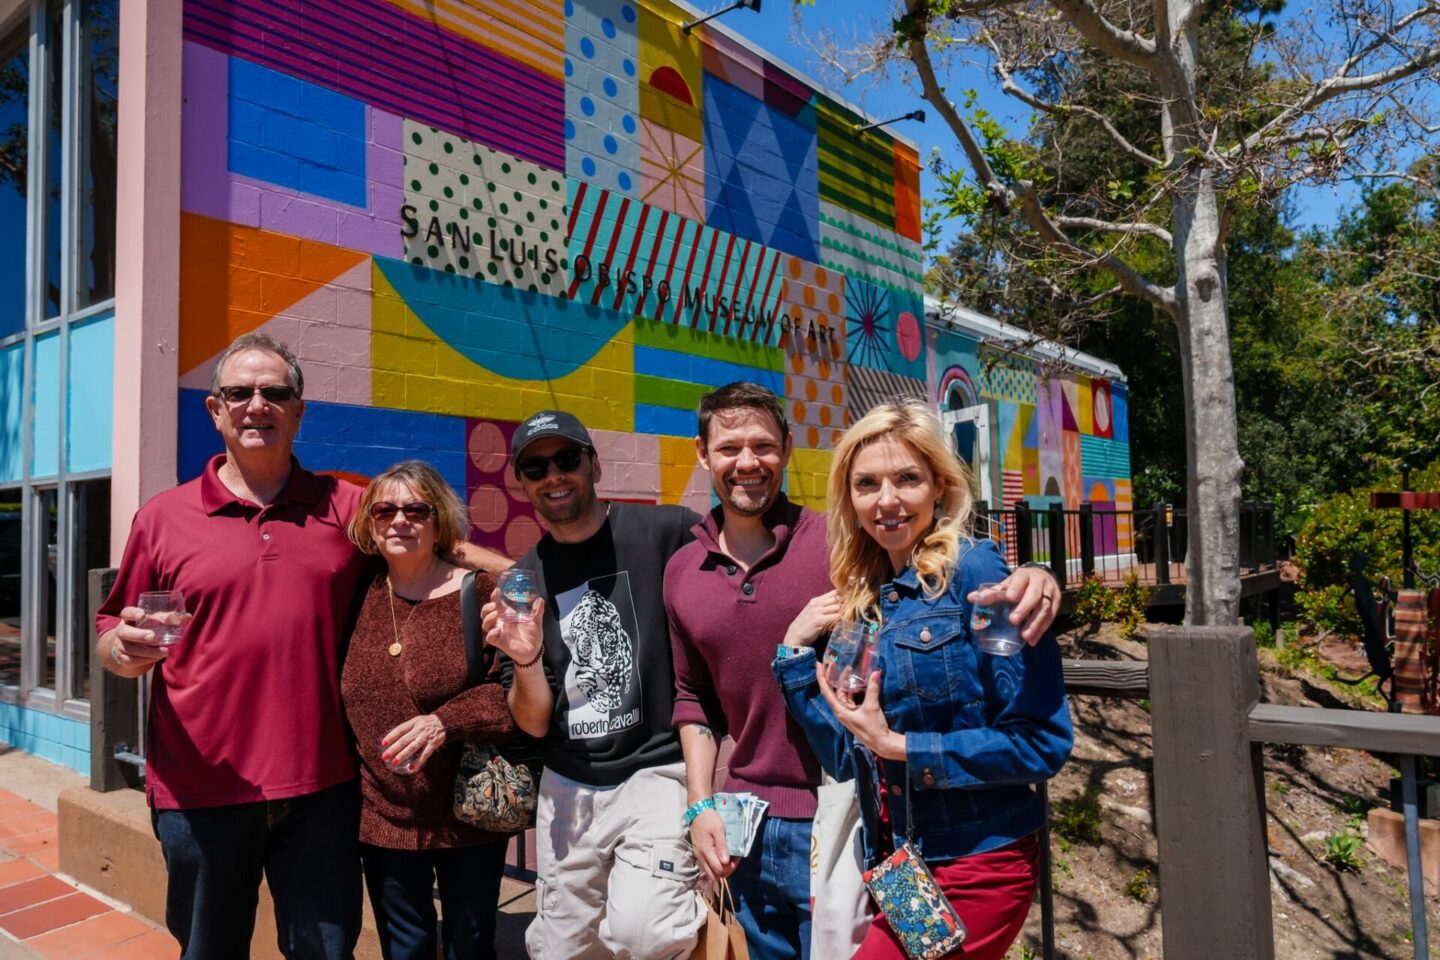 People pose for a picture by a mural in downtown SLO